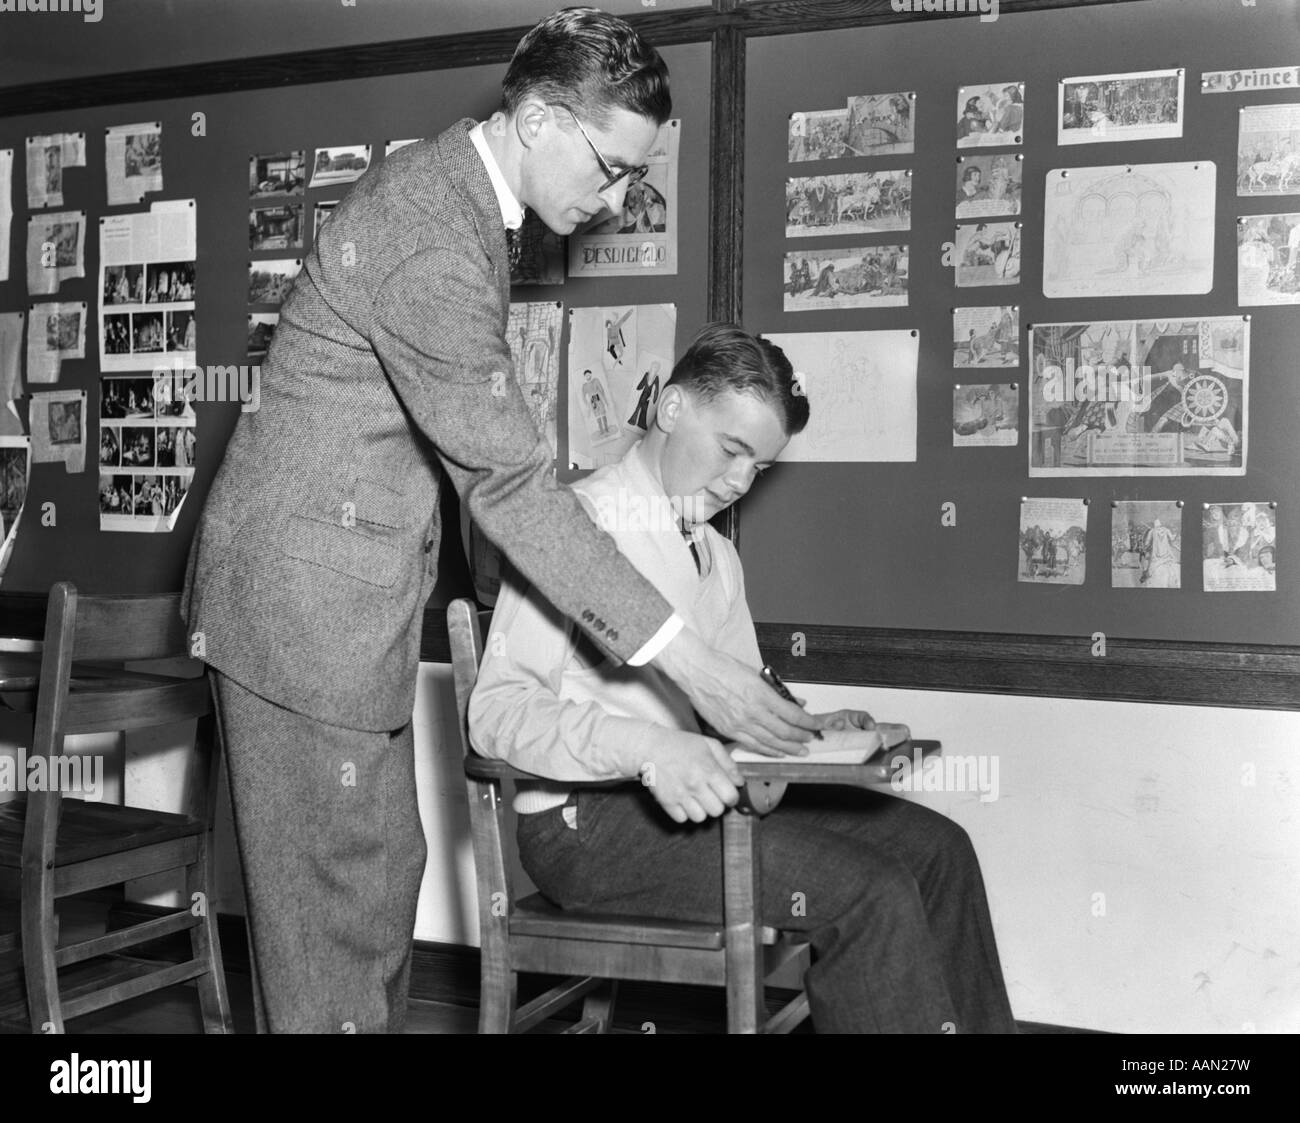 1940s STANDING MALE TEACHER INSTRUCTING SITTING MALE STUDENT IN FRONT OF BULLETIN BOARD CLASSROOM CONCENTRATION FACULTY Stock Photo